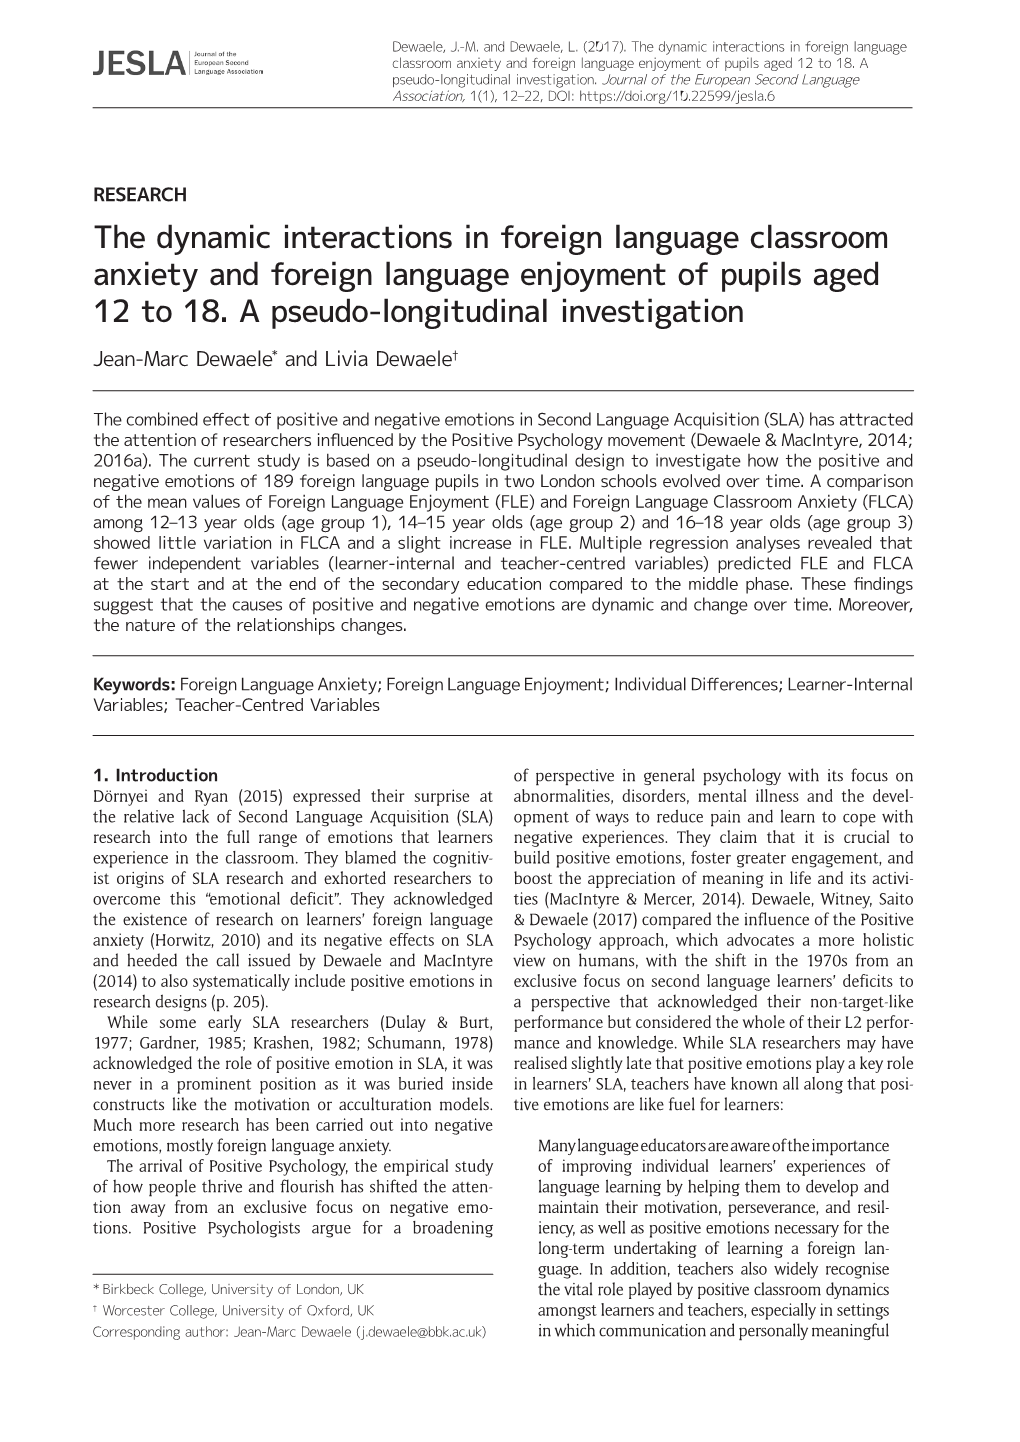 The Dynamic Interactions in Foreign Language Classroom Anxiety and Foreign Language Enjoyment of Pupils Aged 12 to 18